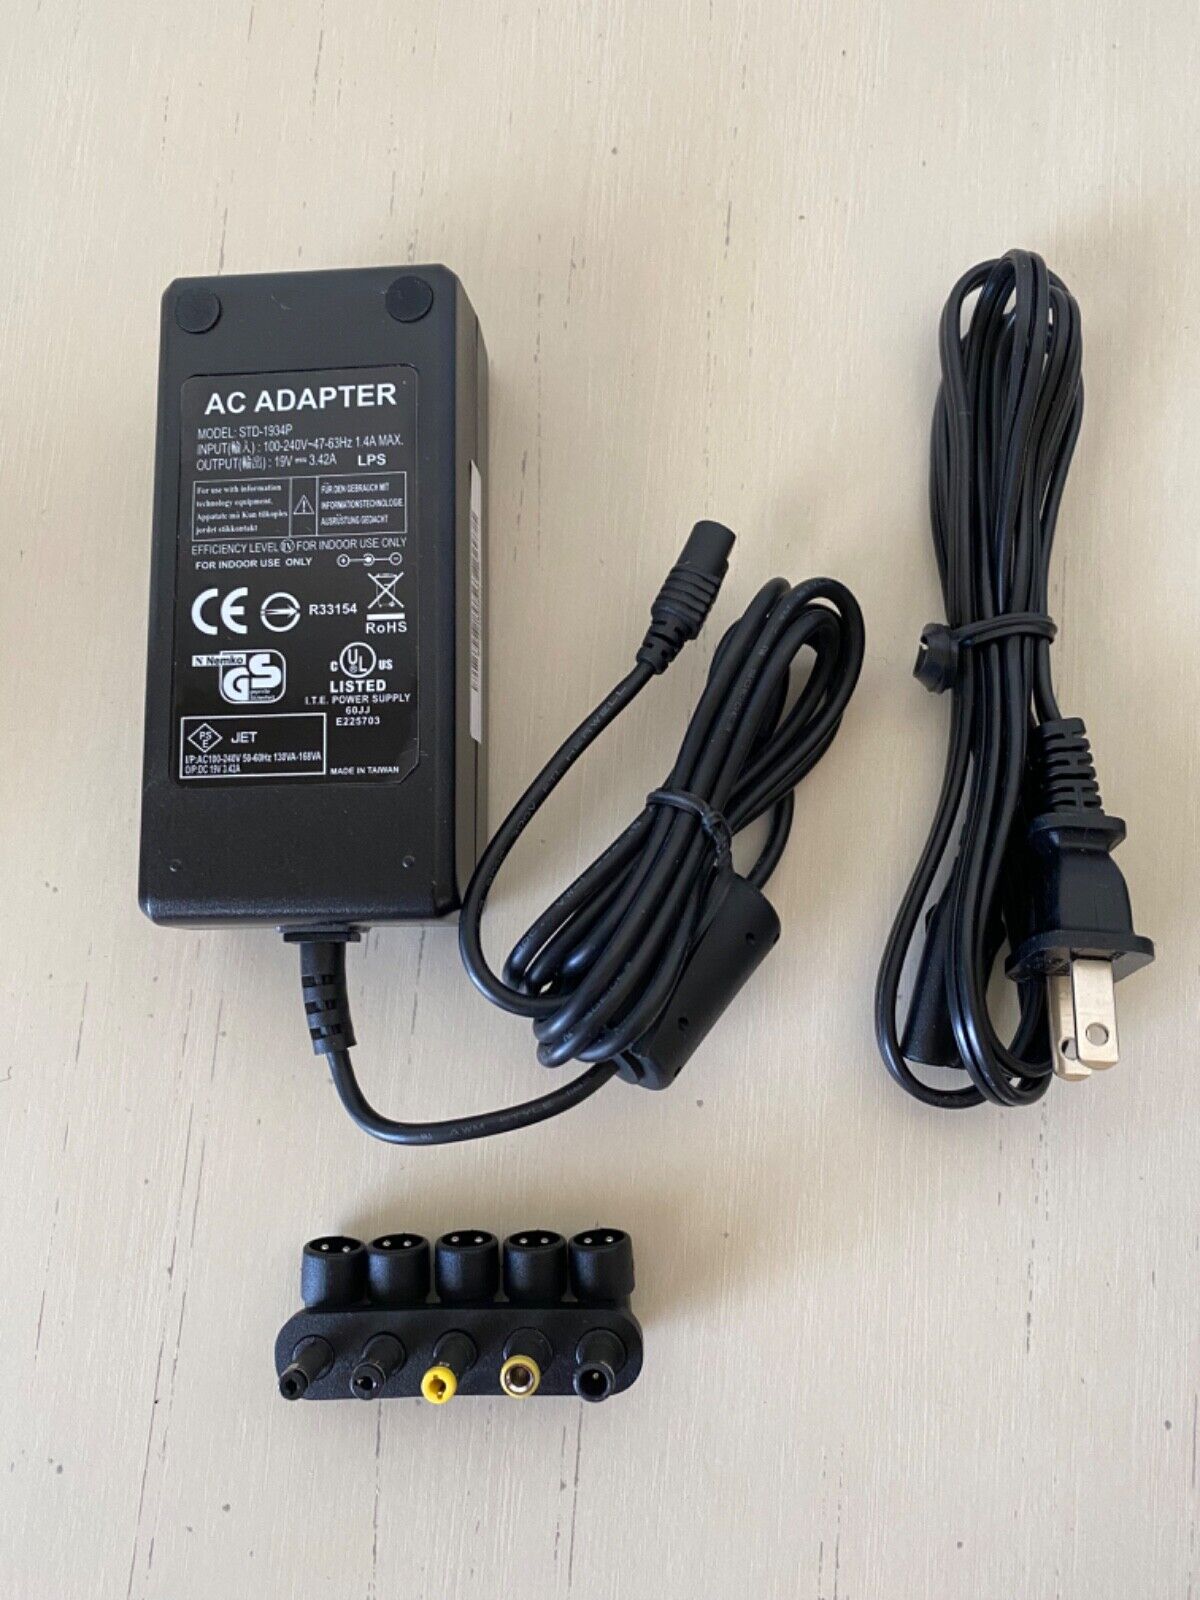 NEW IN BOX POWER PAX AC ADAPTER STD-1934P 19V 3.4A Free USA Shipping